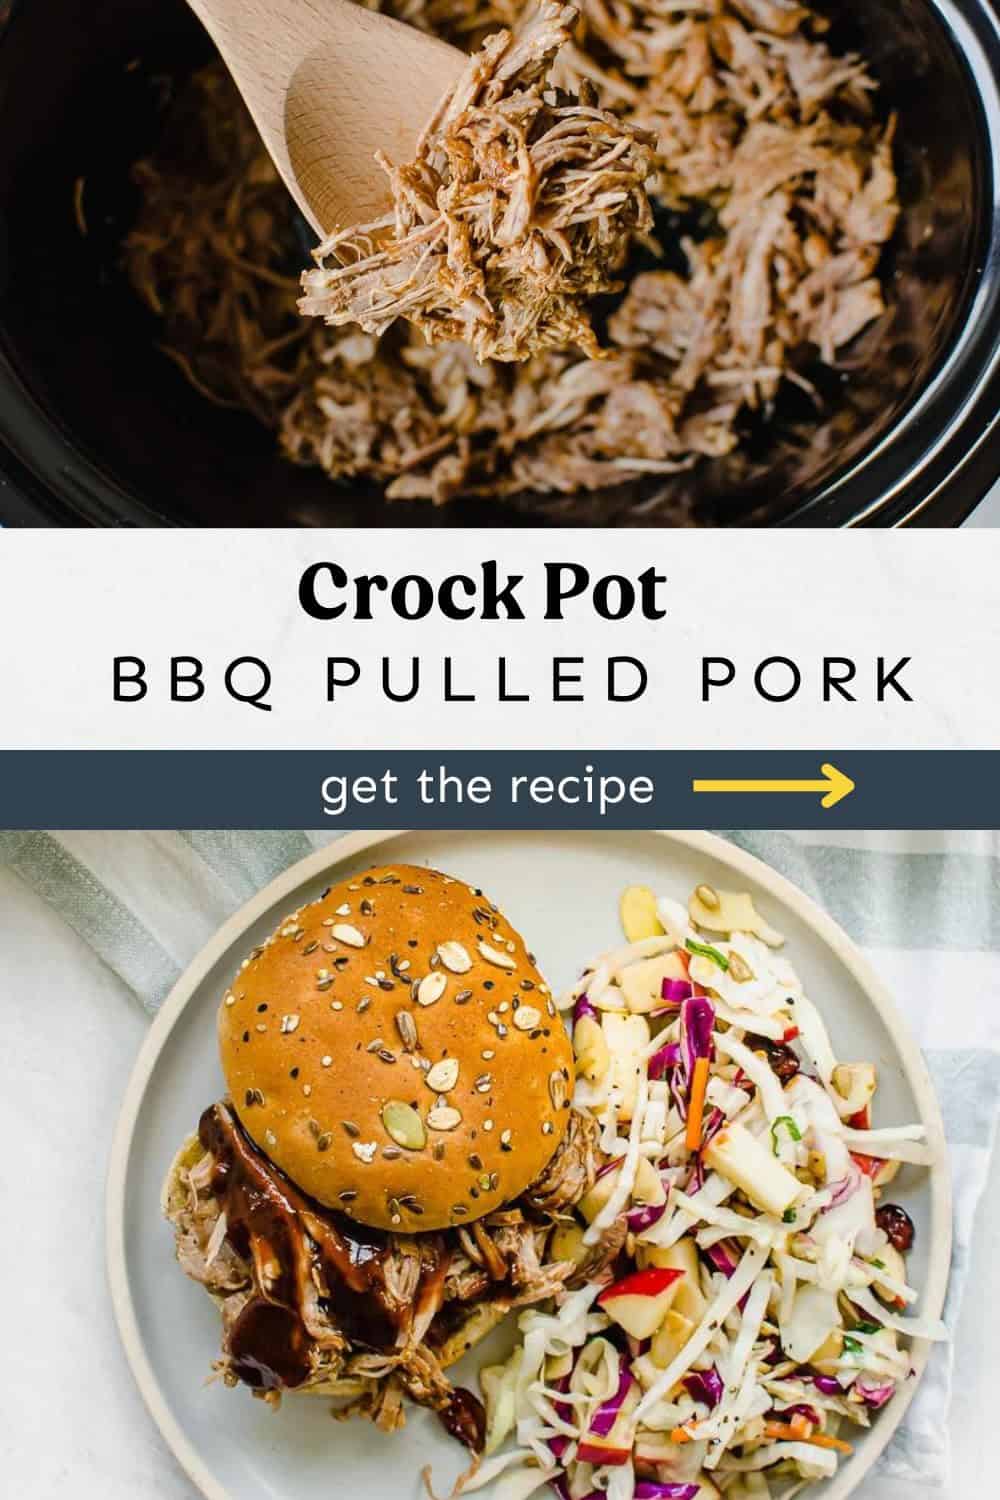 shredded pulled pork in a crock pot and bbq pulled pork on a bun with bbq sauce.